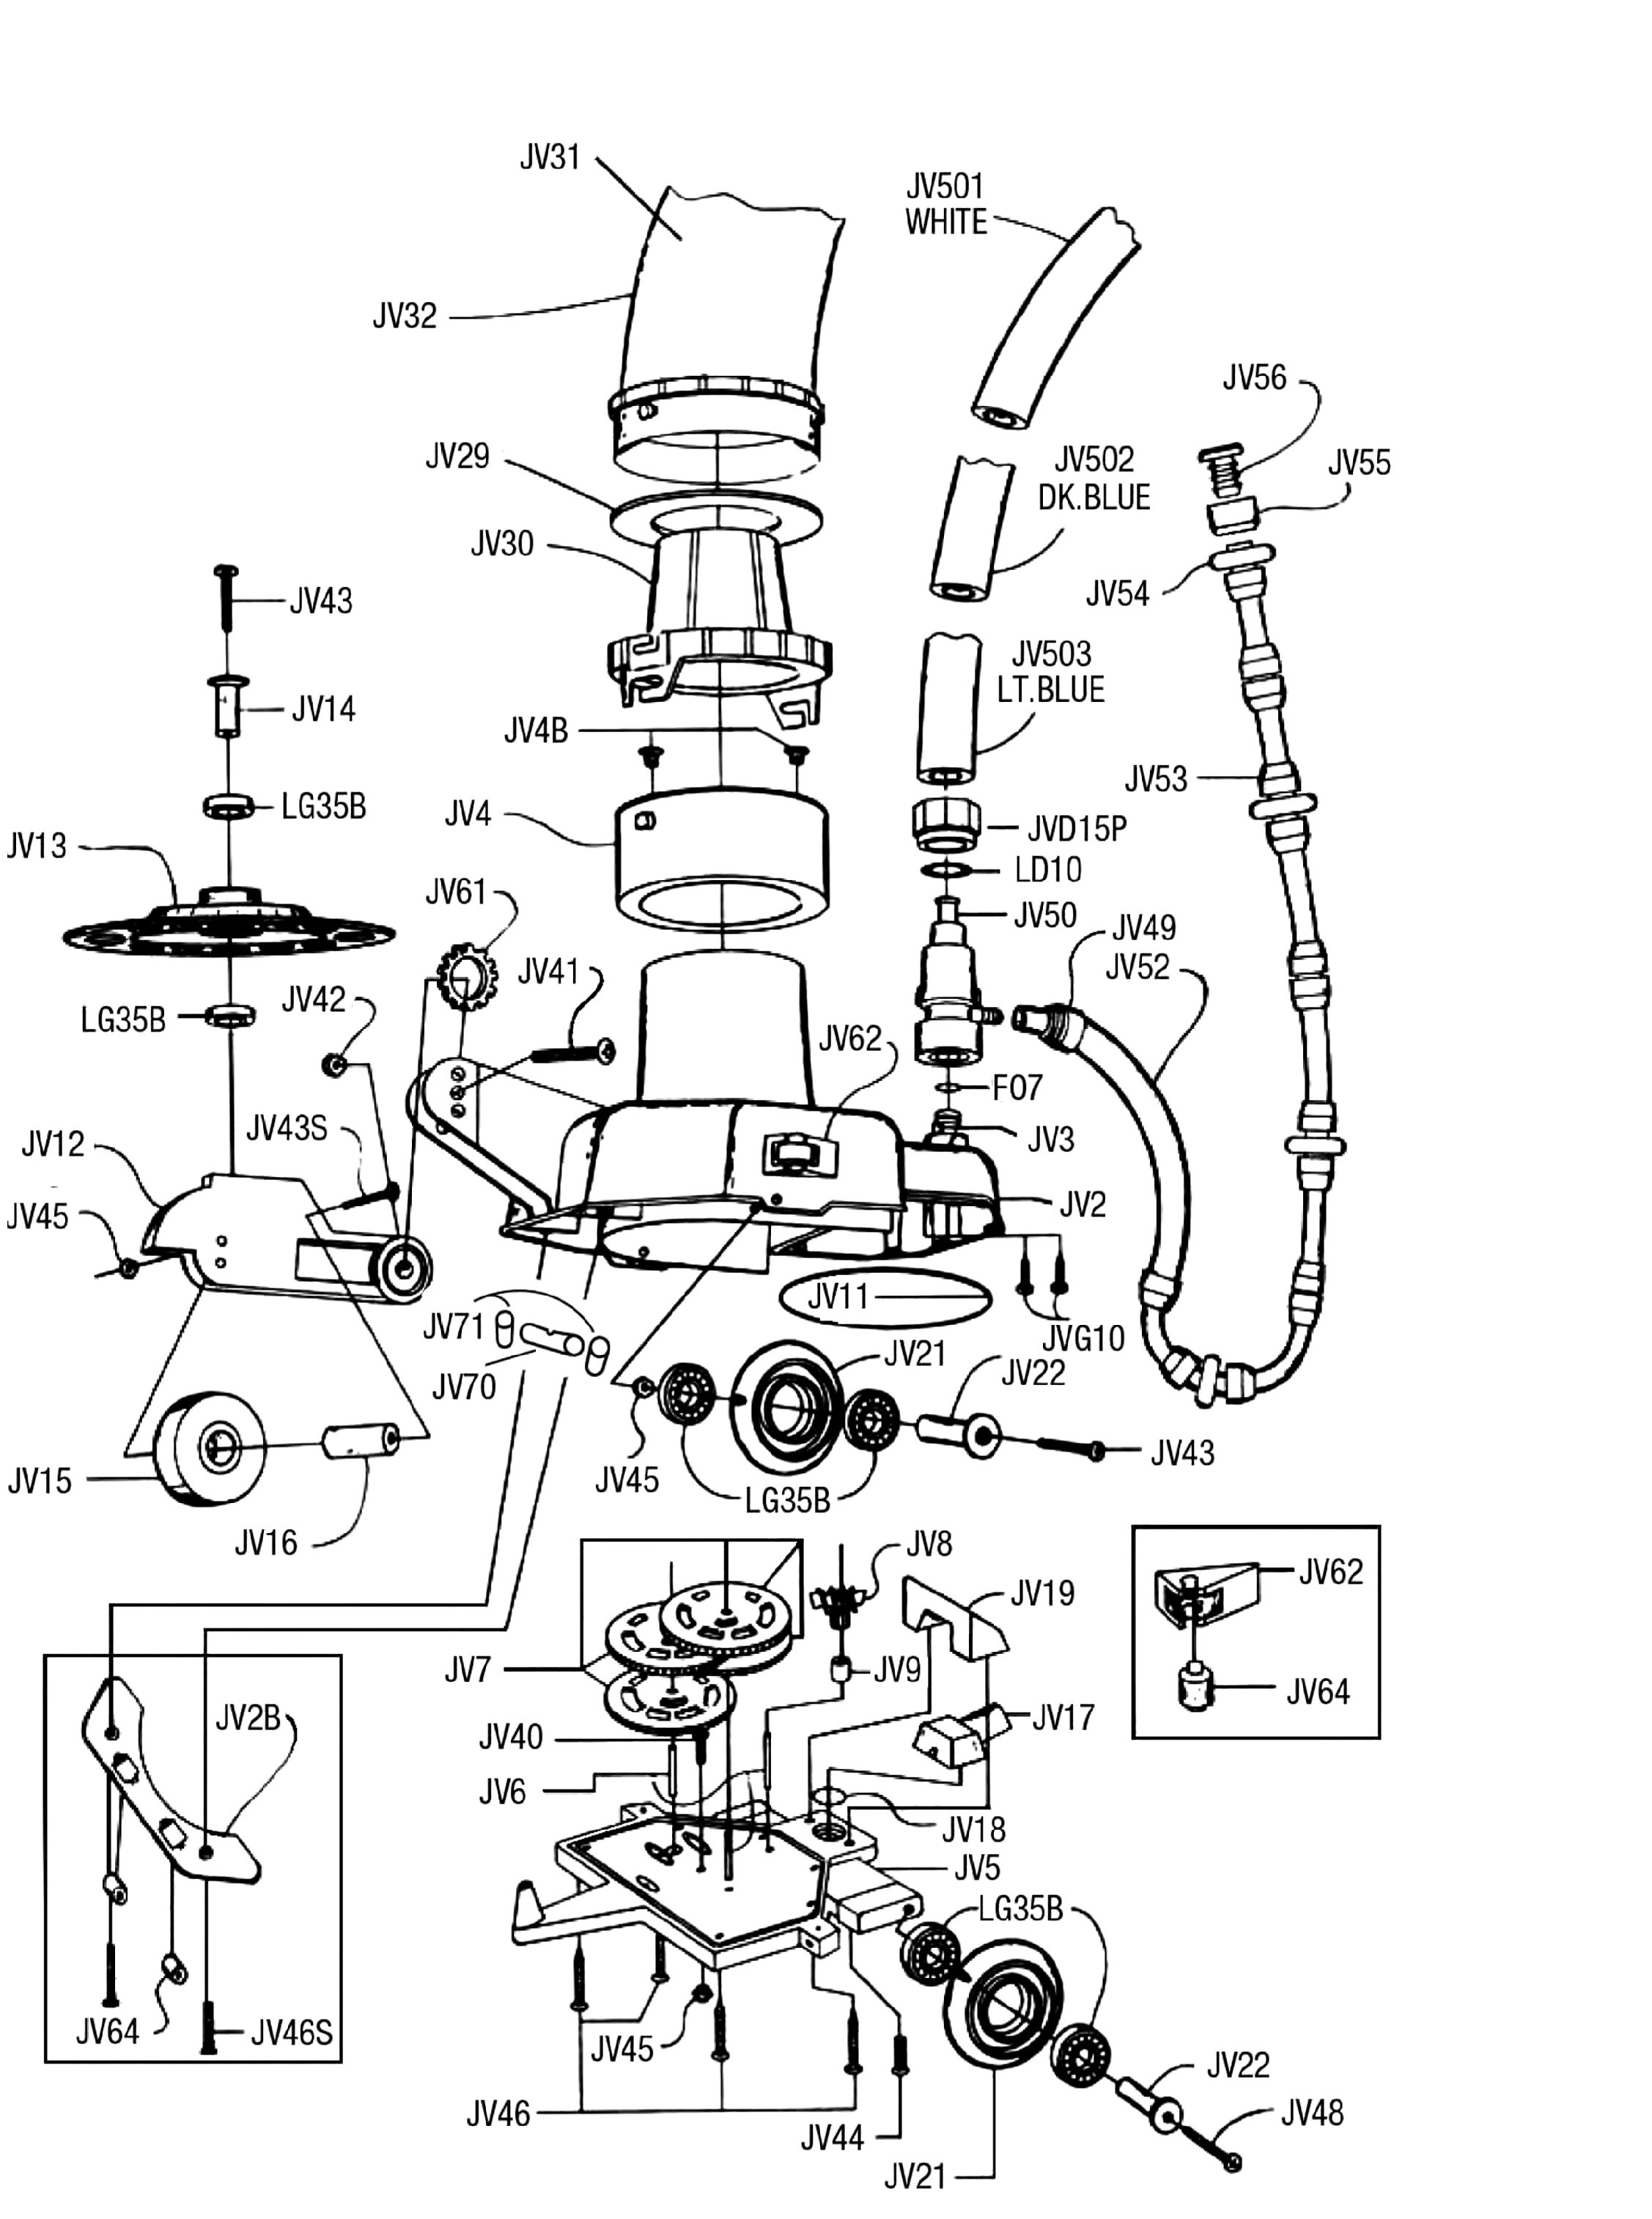 Toyota Camry 2002 Engine Diagram 2003 toyota Camry Parts Diagram Of Toyota Camry 2002 Engine Diagram